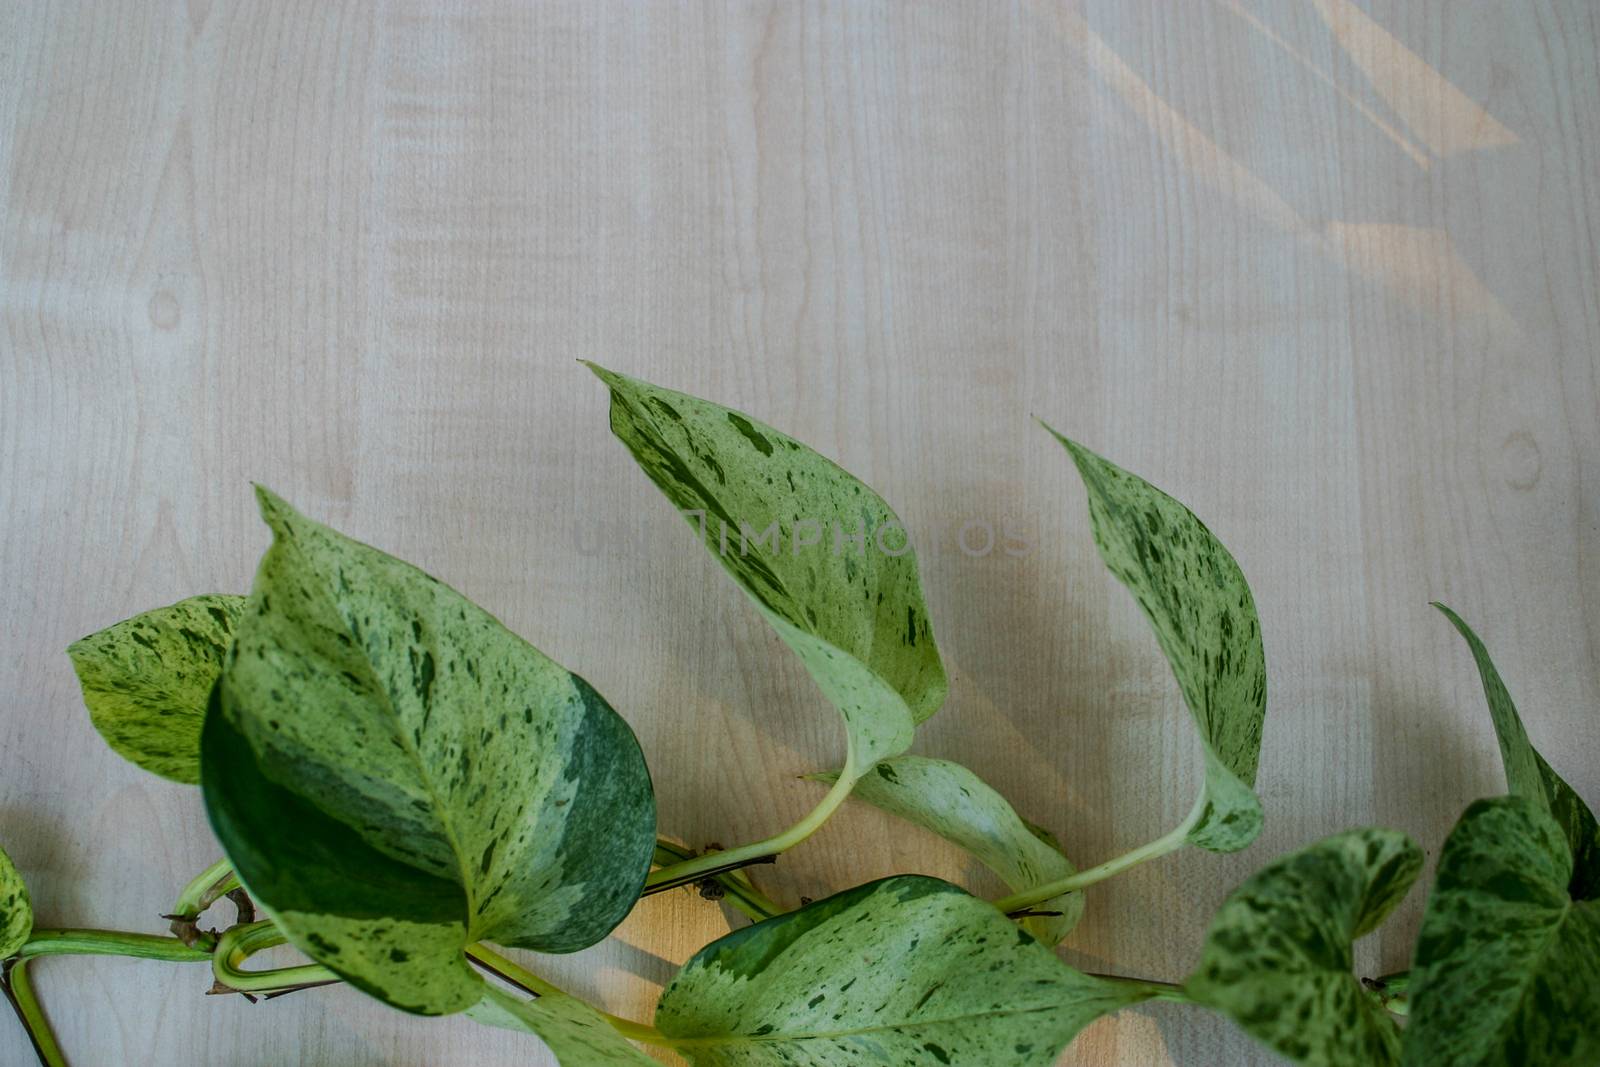 Branch of scindapsus marble queen liana on a wooden background